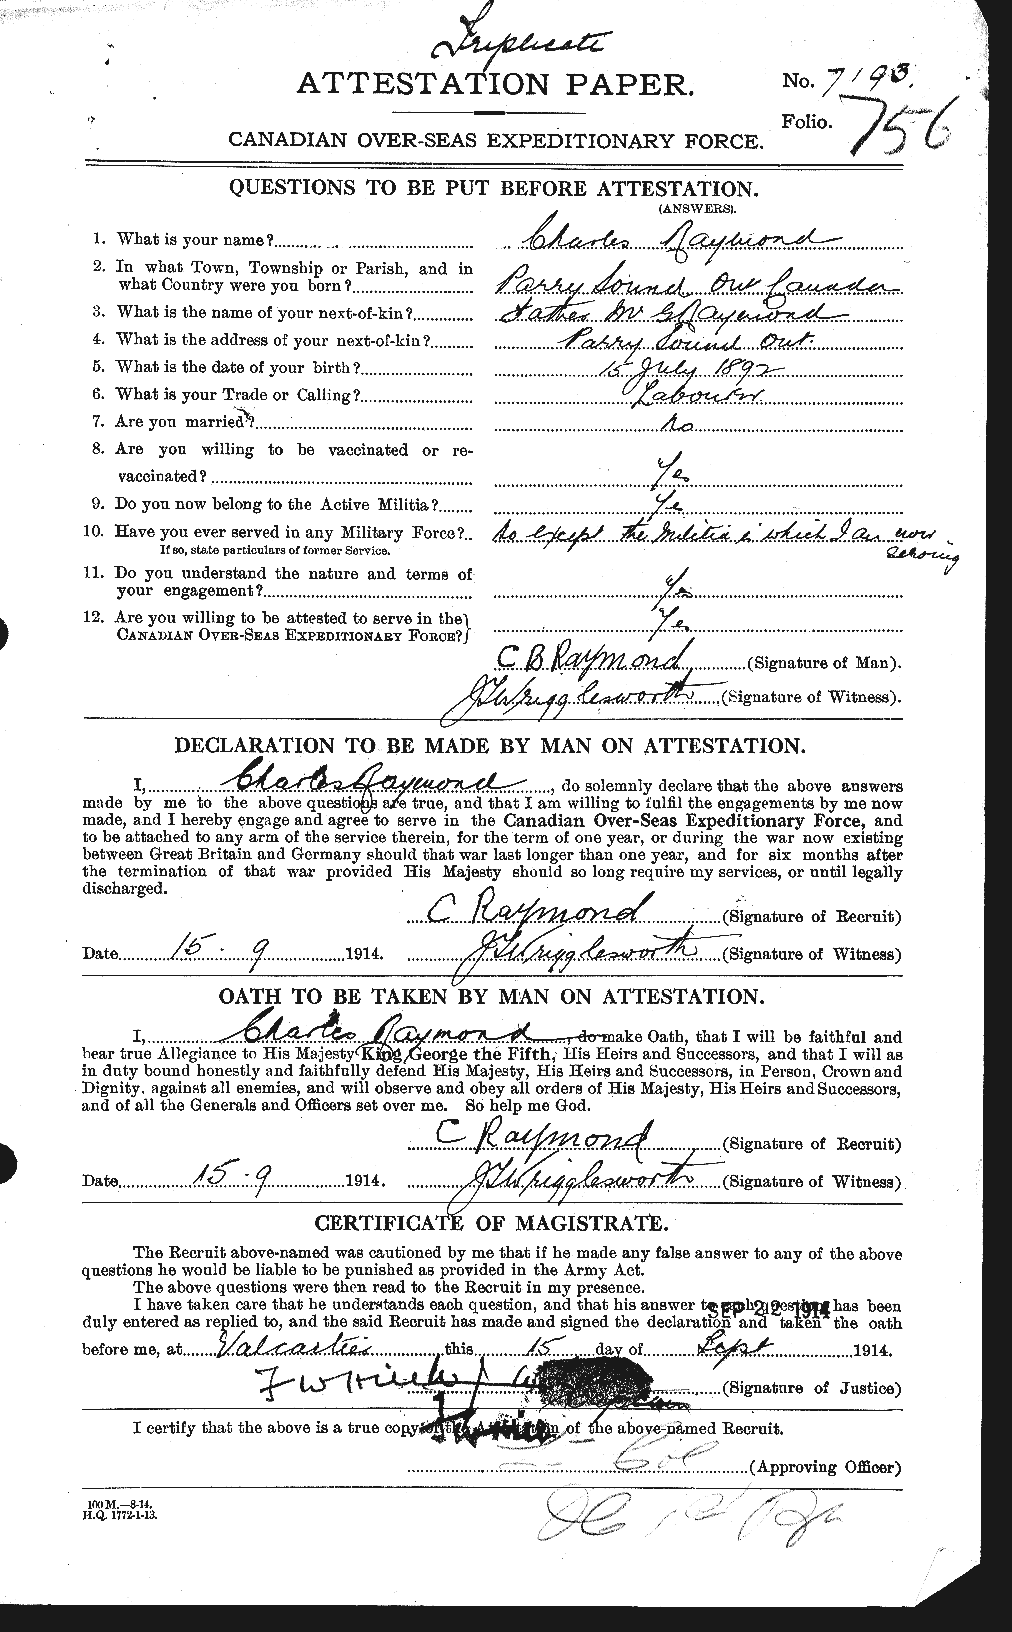 Personnel Records of the First World War - CEF 595273a